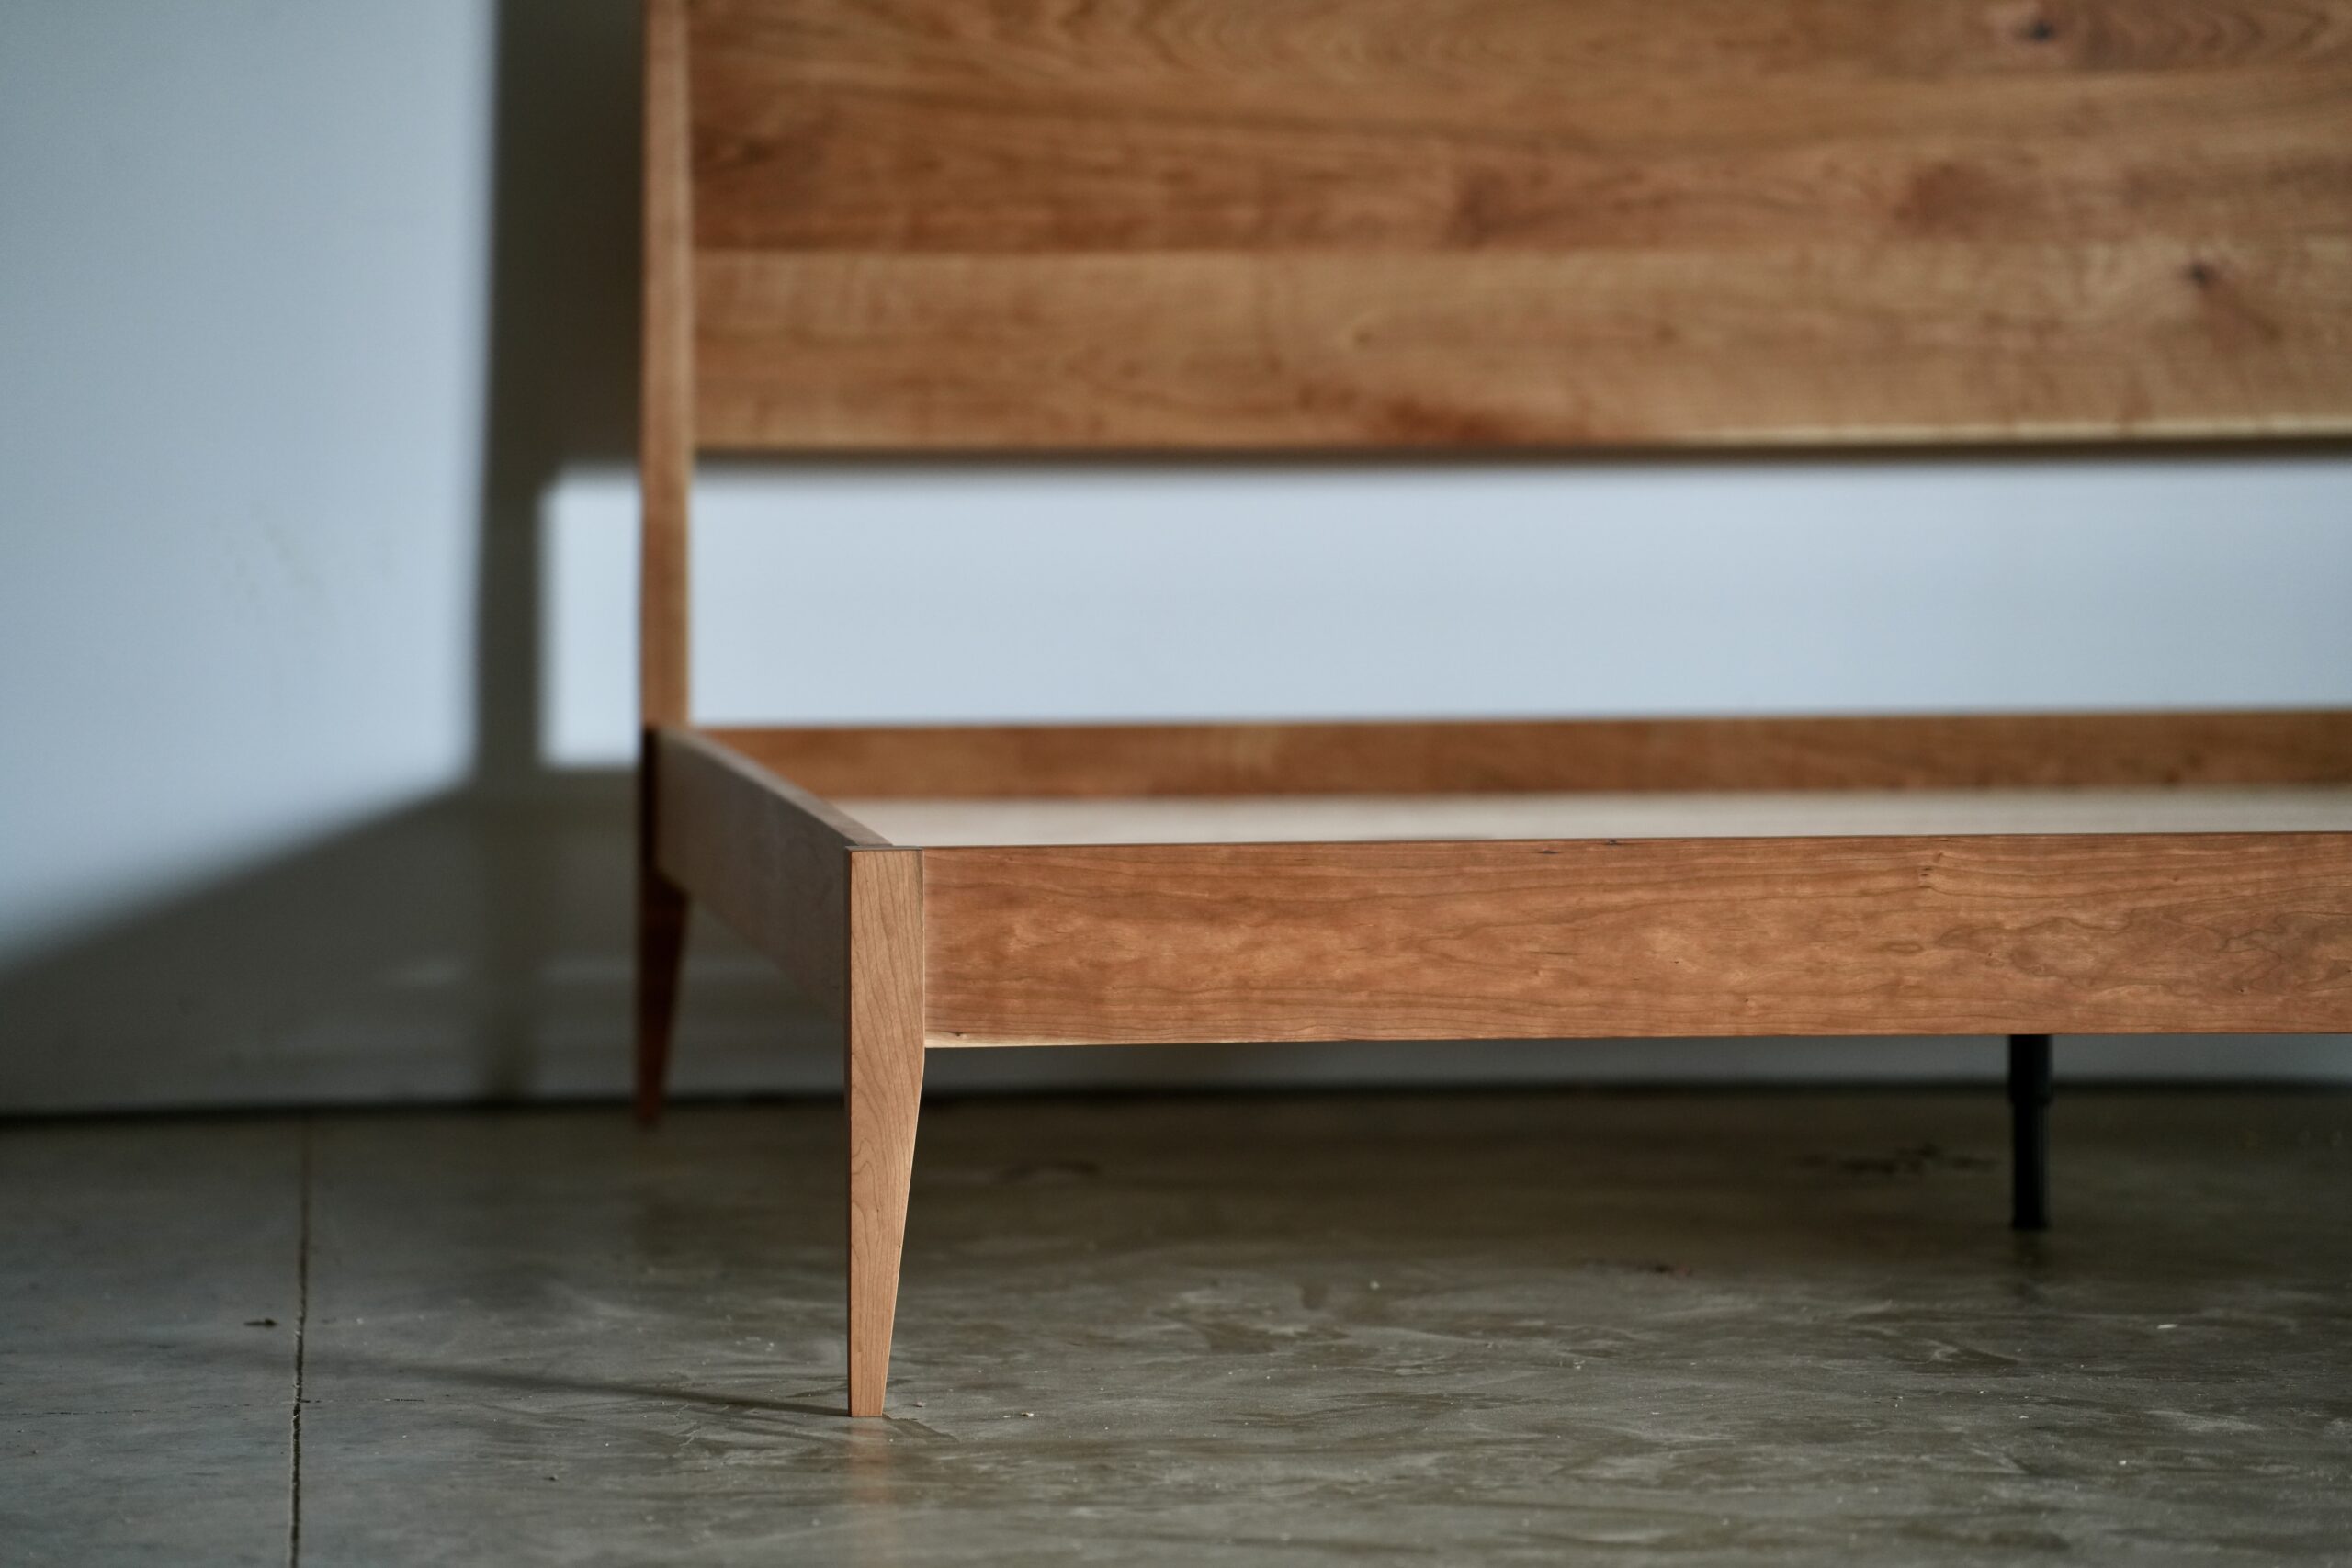 A close-up of the tapered leg on a cherry shaker style bed.